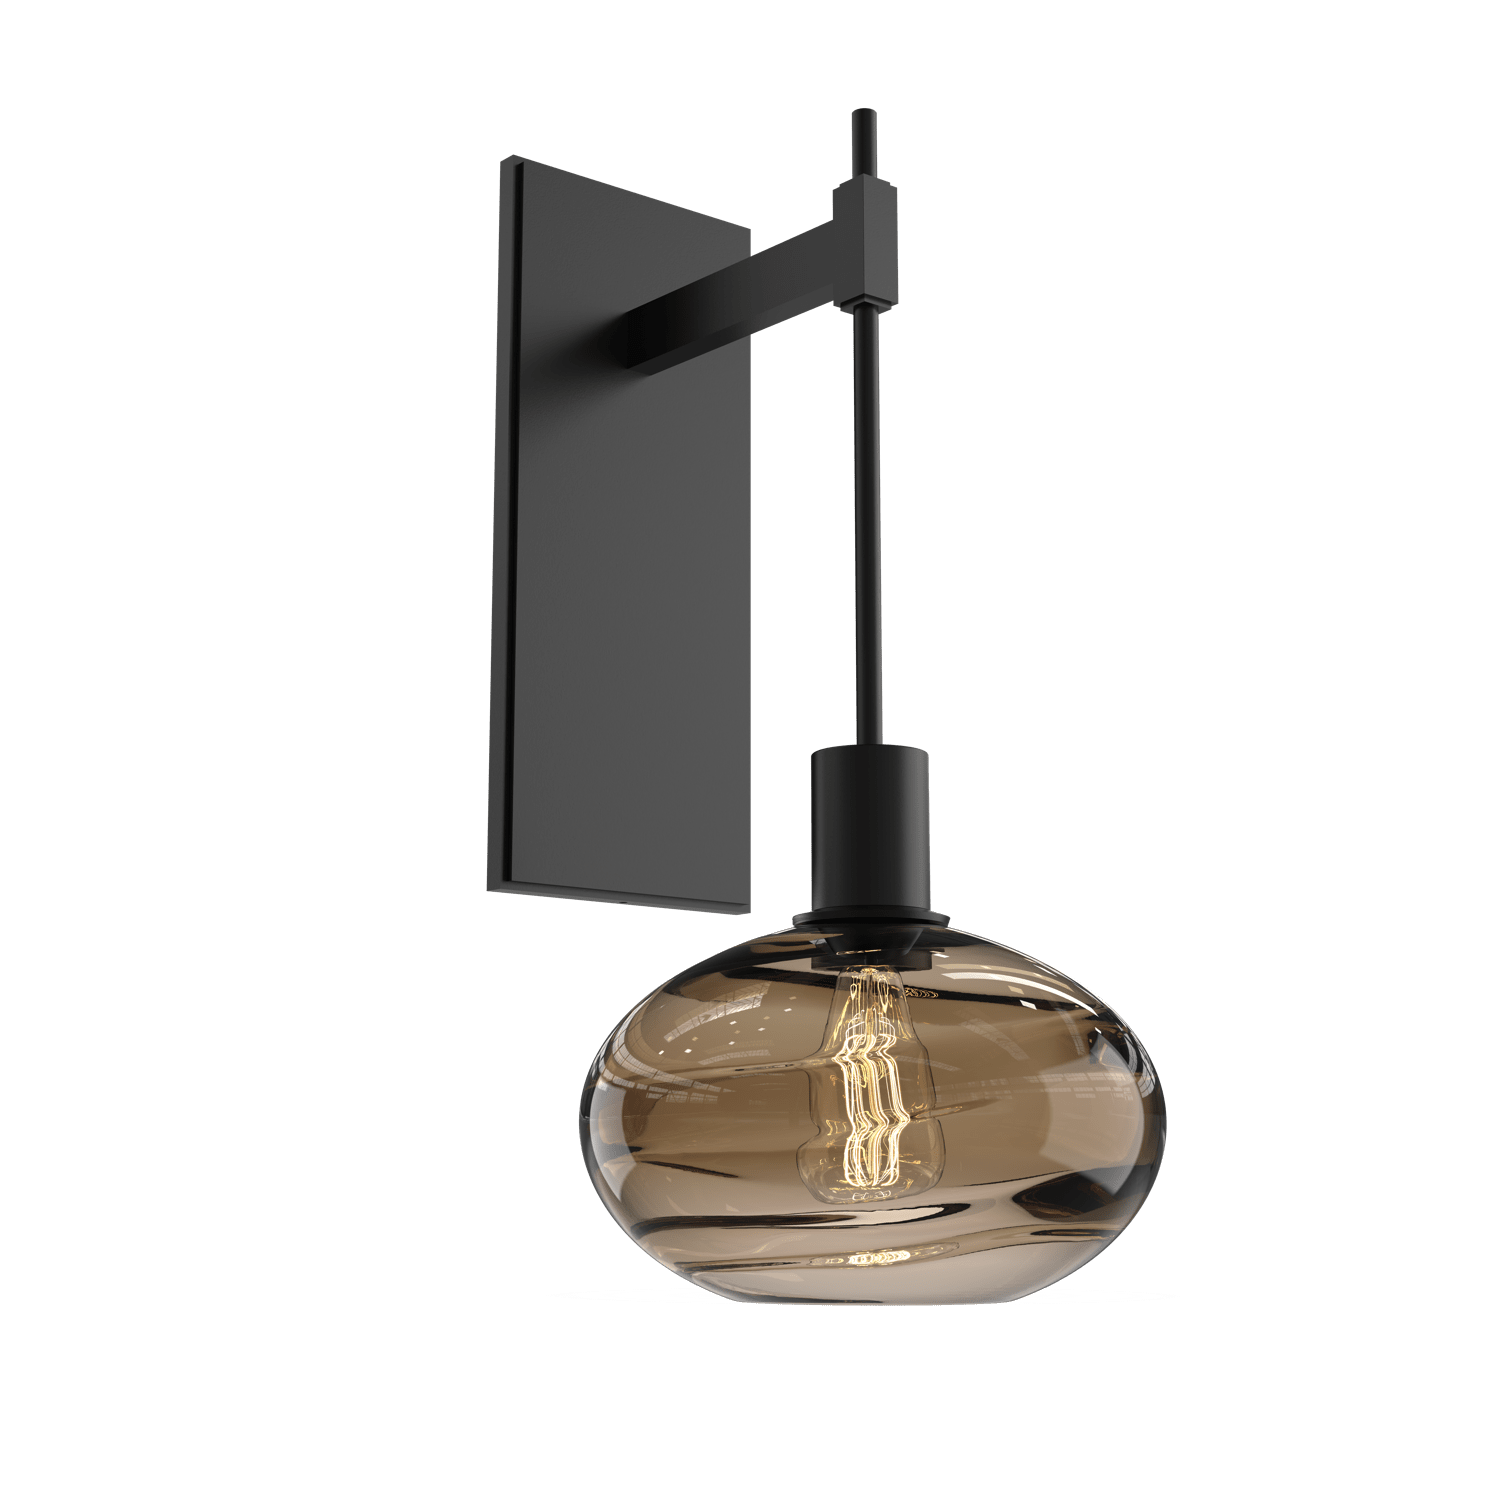 IDB0036-18-MB-OB-Hammerton-Studio-Optic-Blown-Glass-Coppa-tempo-wall-sconce-with-matte-black-finish-and-optic-bronze-blown-glass-shades-and-incandescent-lamping